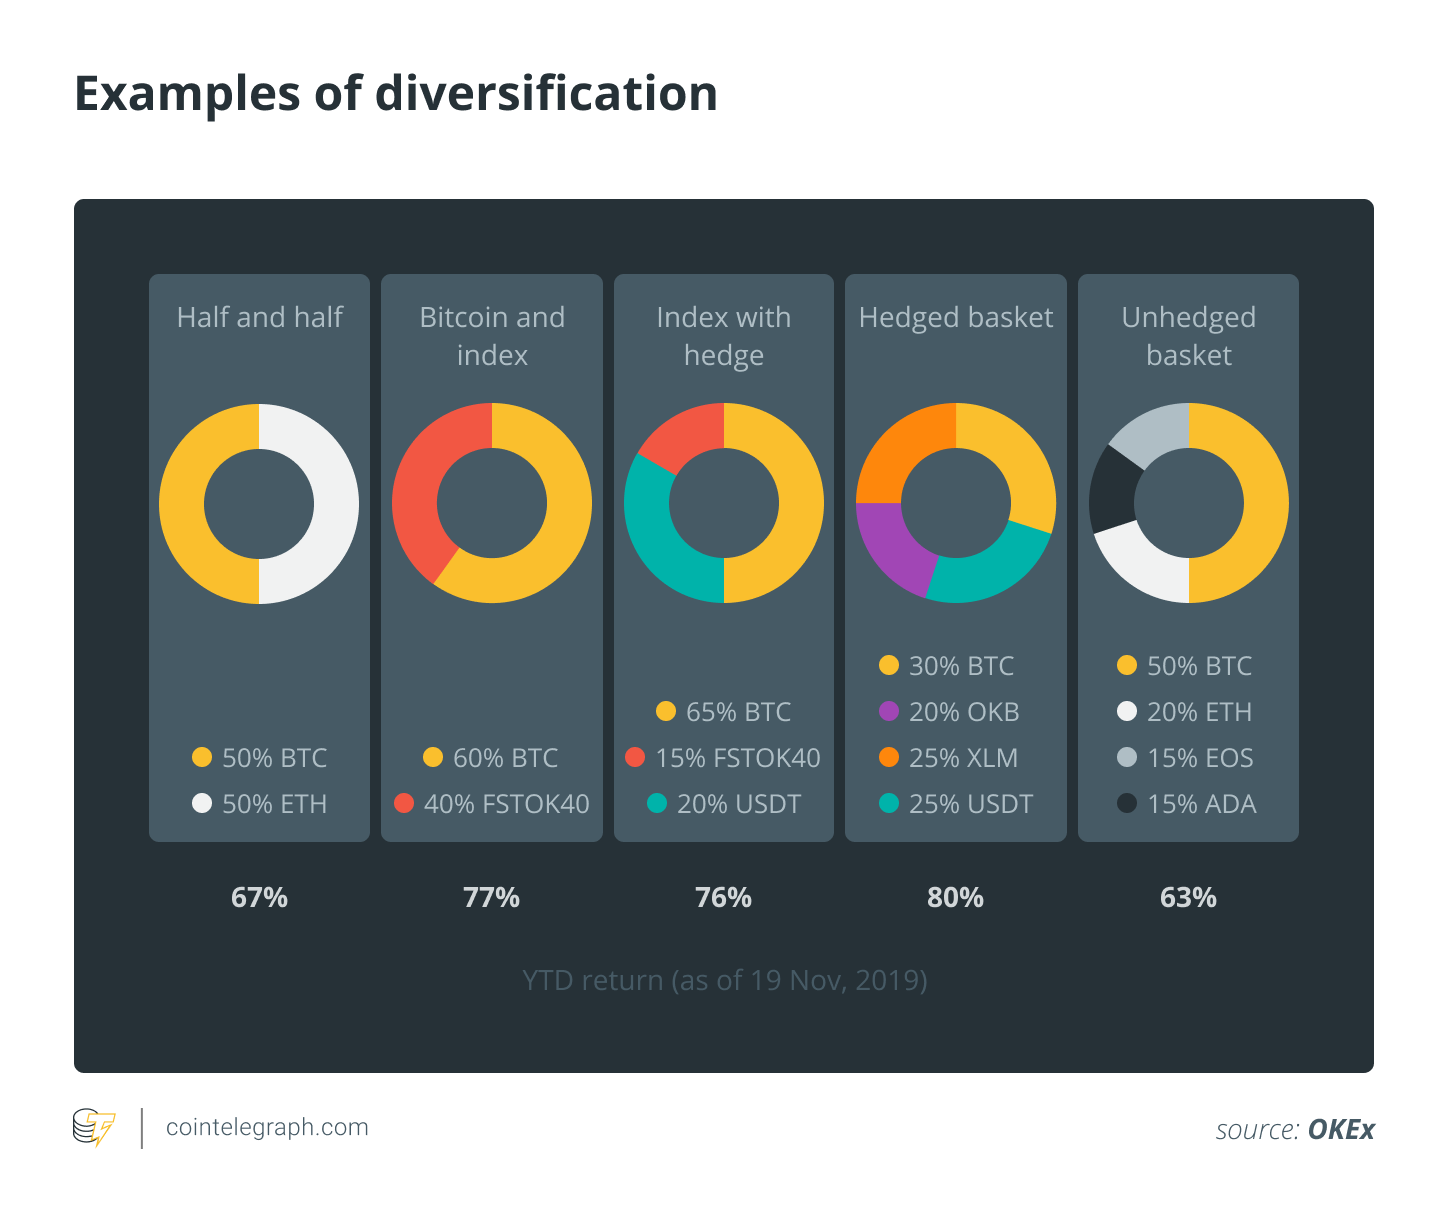 Examples of diversification